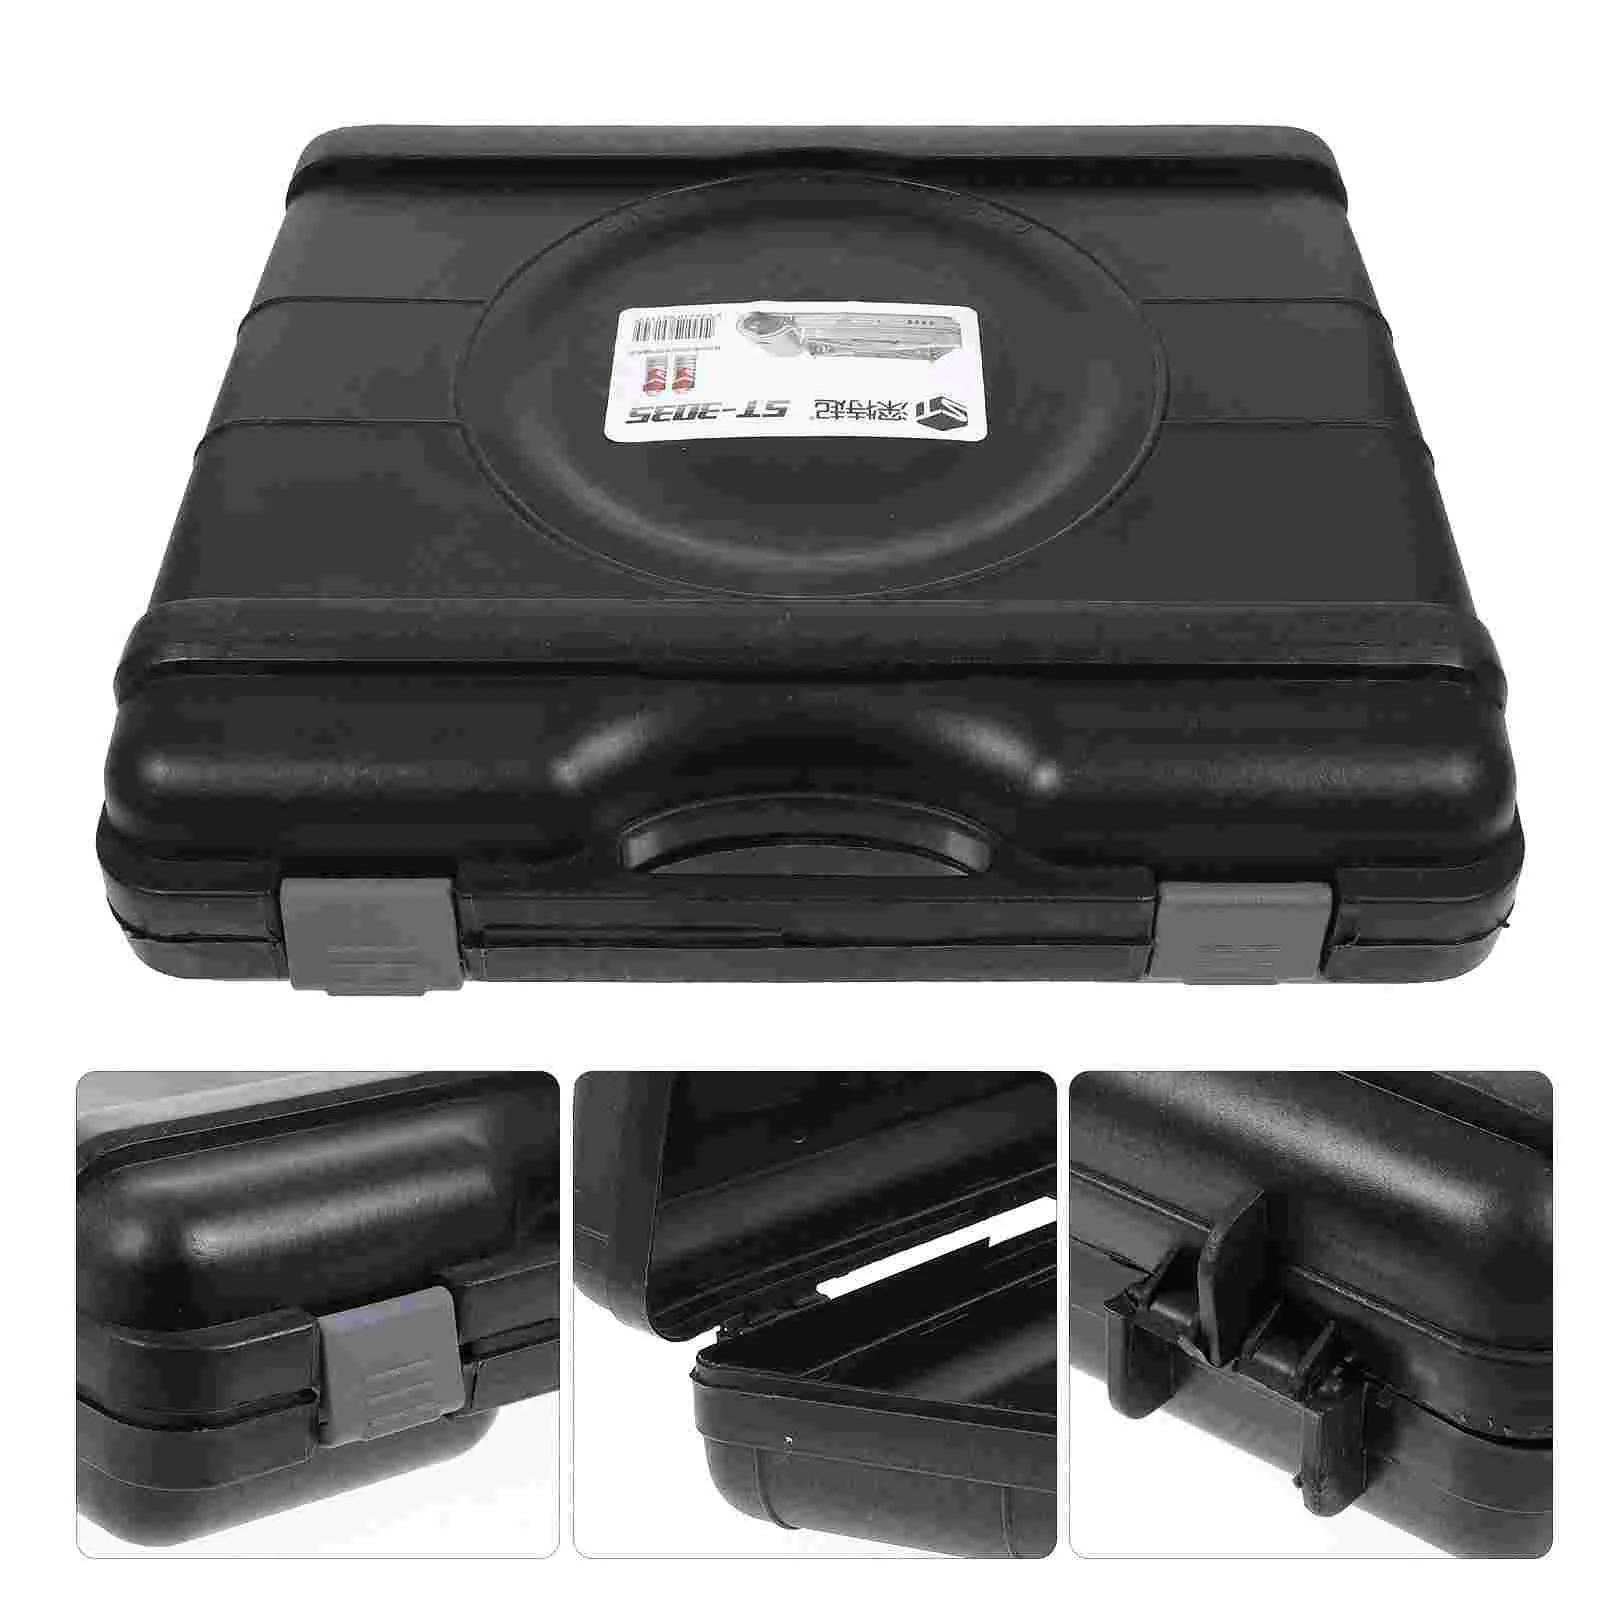 

Stove Case Carry Burner Gas Carrying Camp Holder Butane Camping Propane Grill Box Storage Container Cooktop Heavy Duty